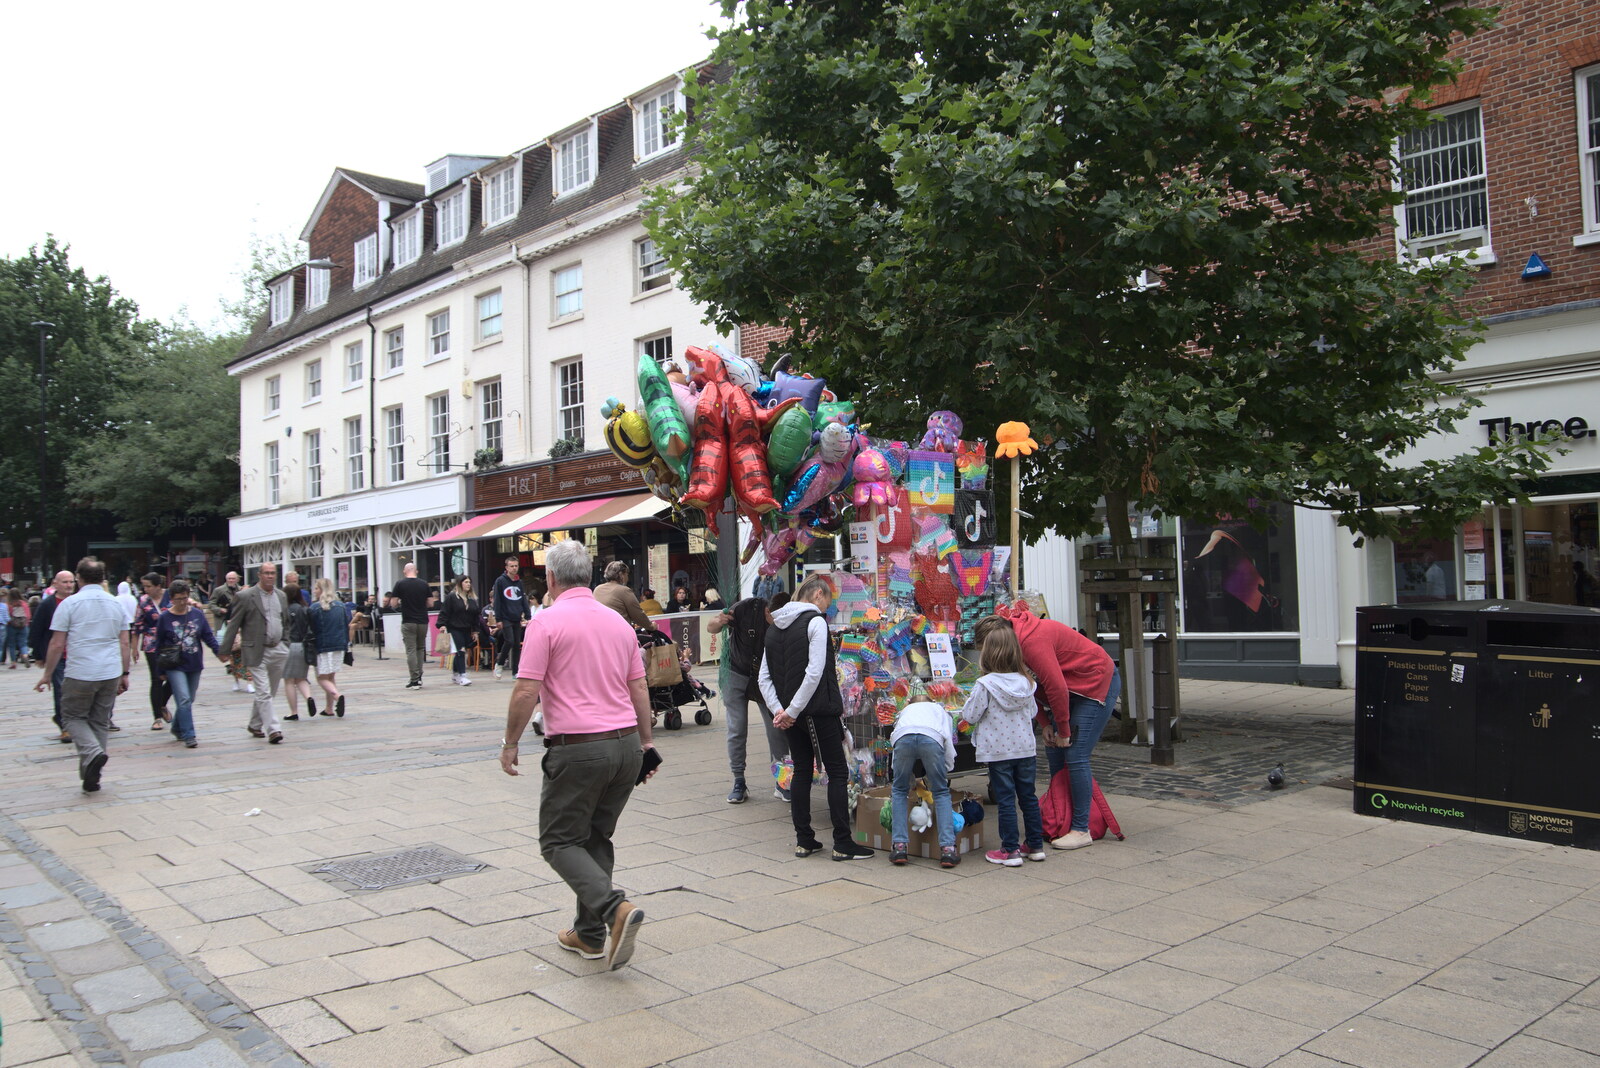 A balloon seller on Gentleman's Walk from Dippy and the City Dinosaur Trail, Norwich, Norfolk - 19th August 2021